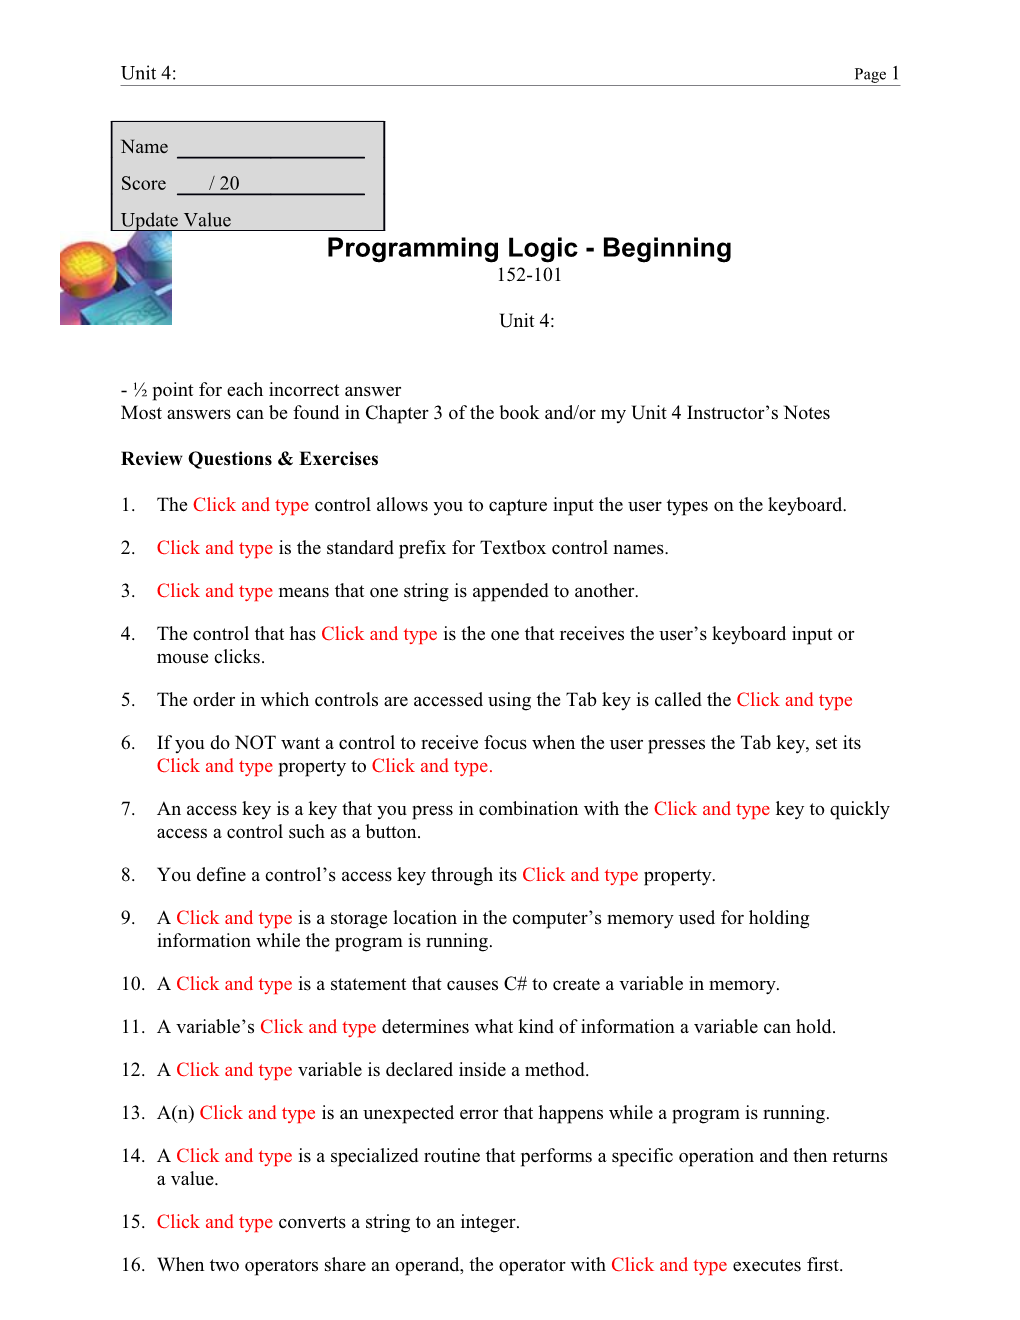 Unit 4: Sequential Processing Page 1